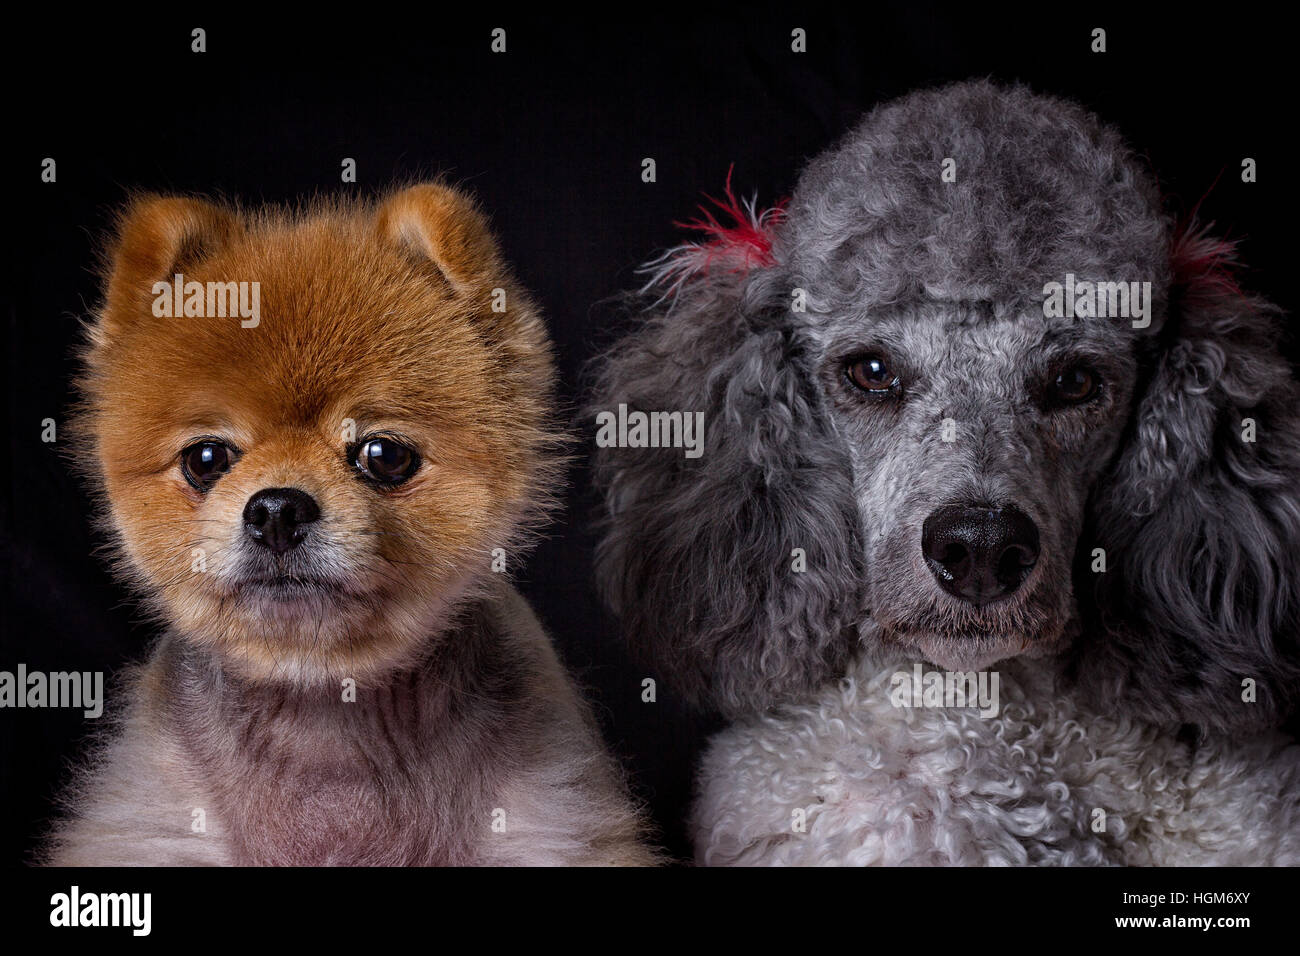 pomeranian and poodle puppies best friends Stock Photo - Alamy